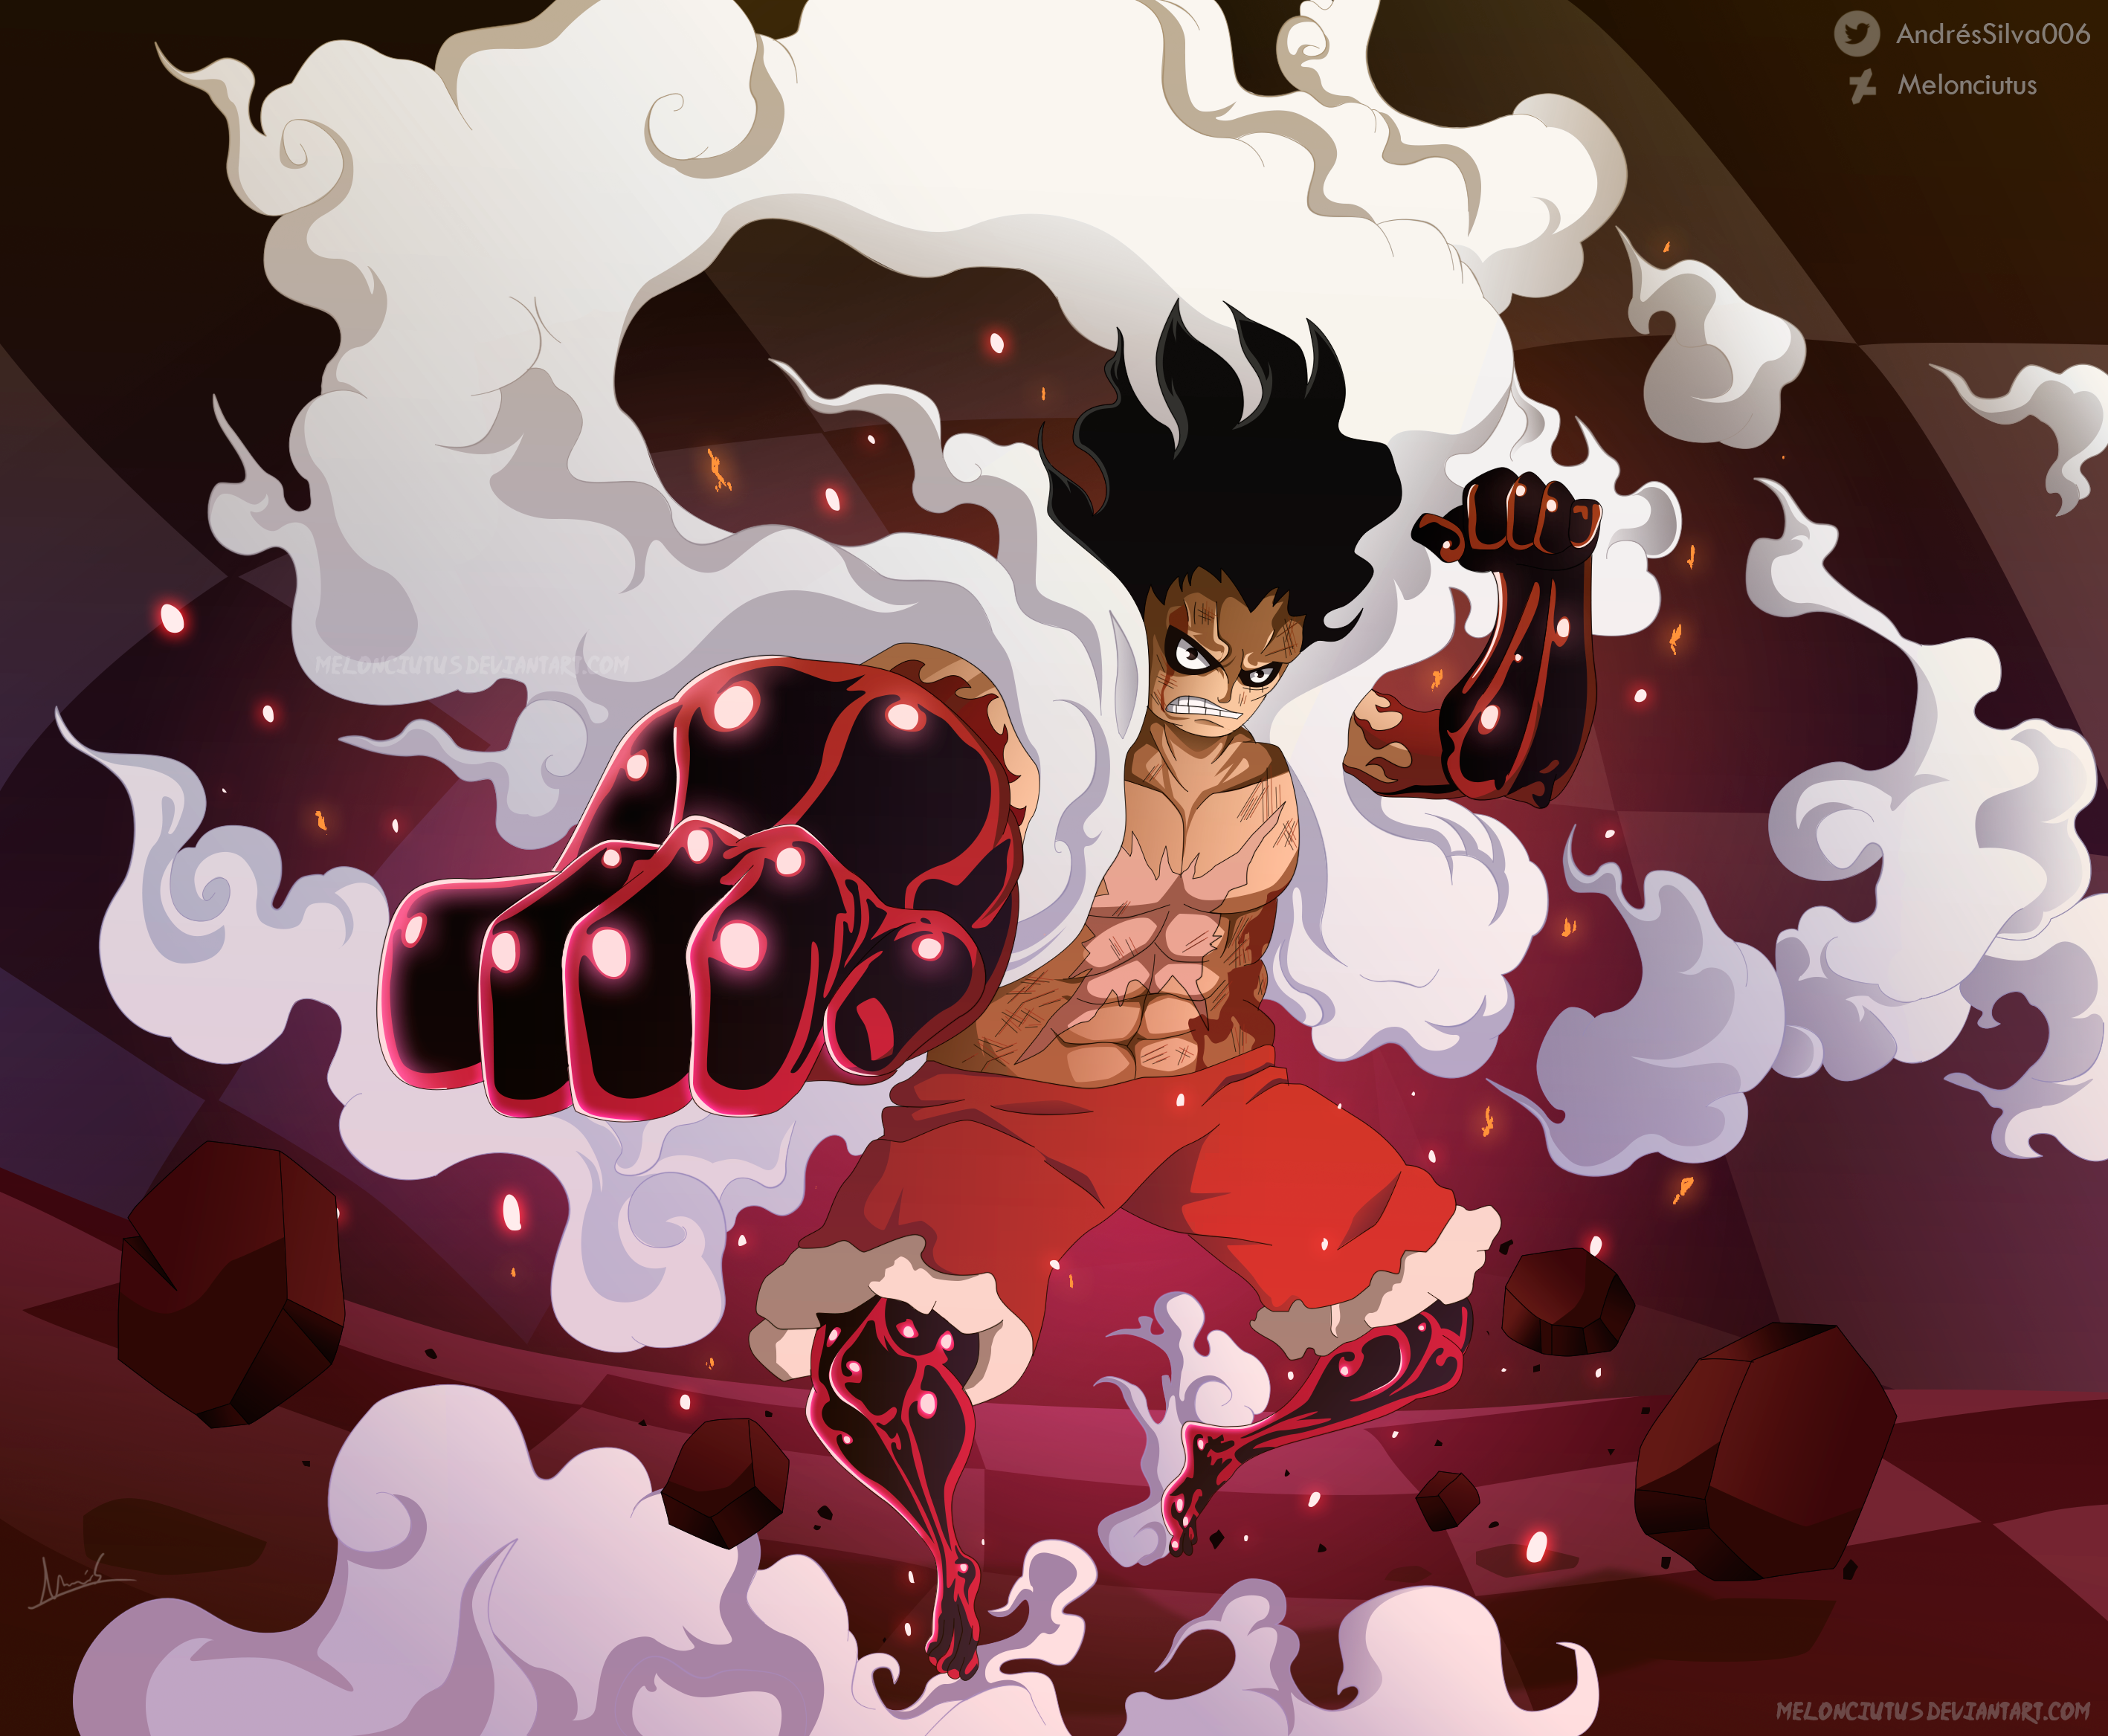 Anime One Piece HD Wallpaper by Melonciutus